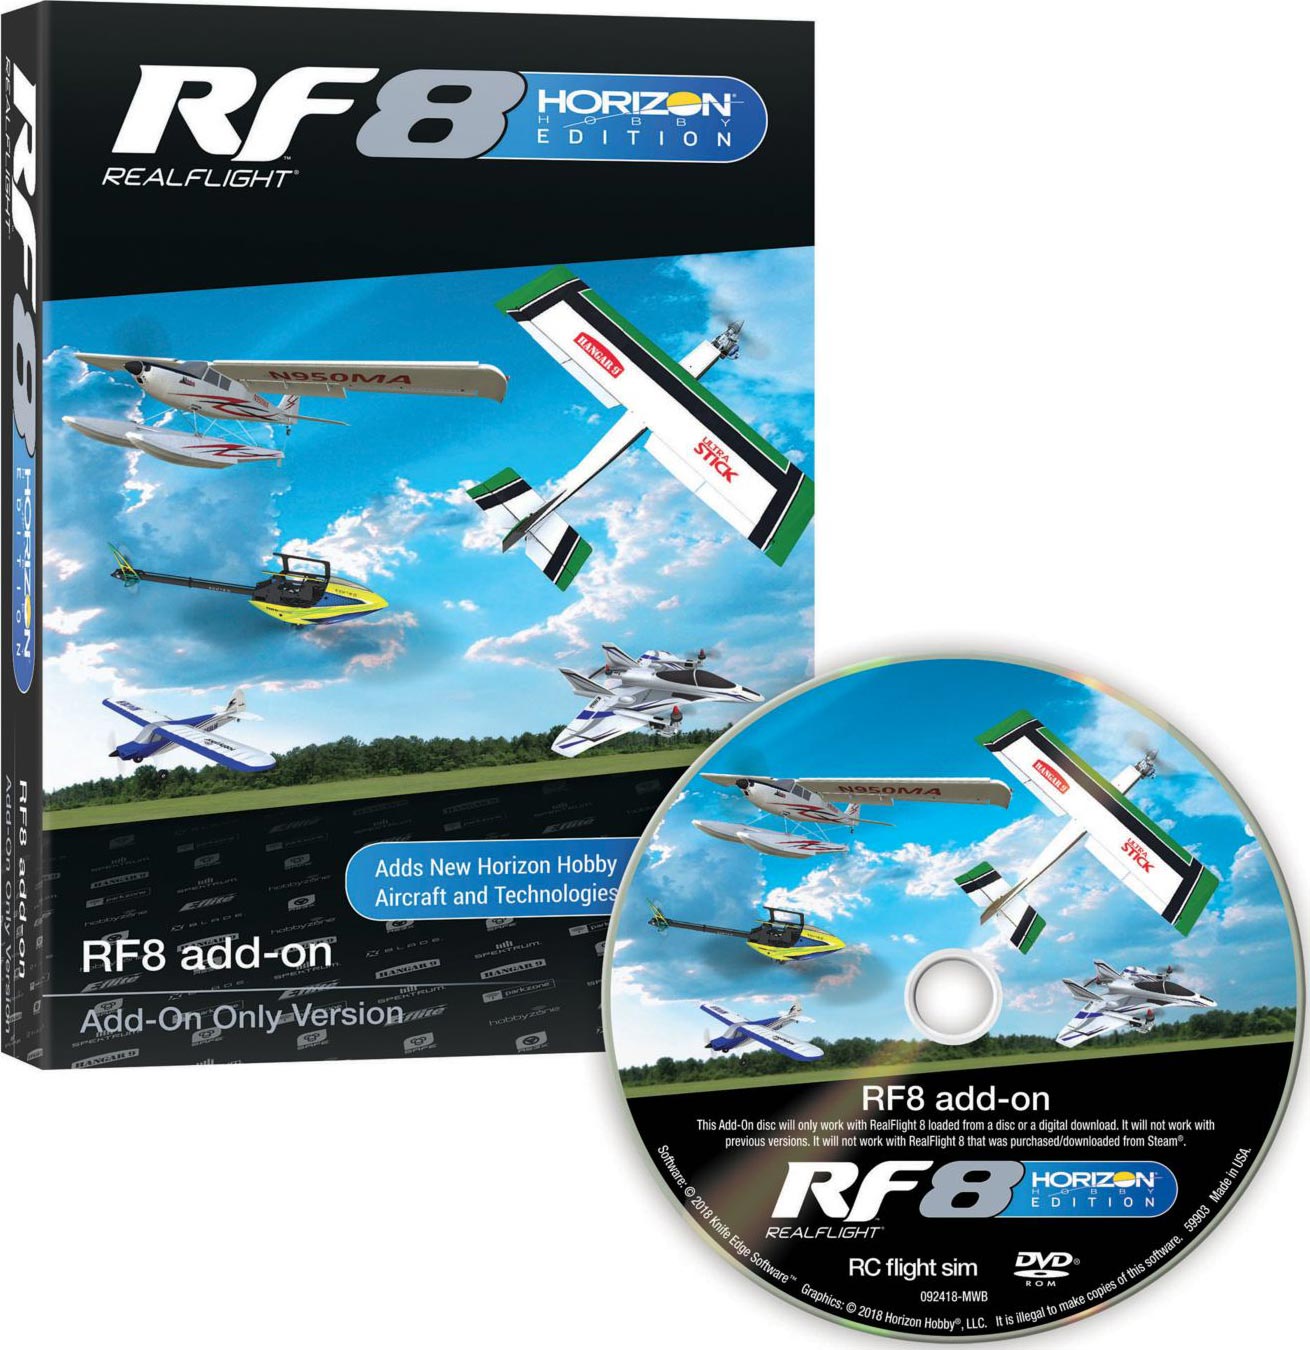 RFL1002 - Flight 8 Horizon Hobby Edition Add-On Software (Req's RF8) By REAL FLIGHT @ Great Hobbies